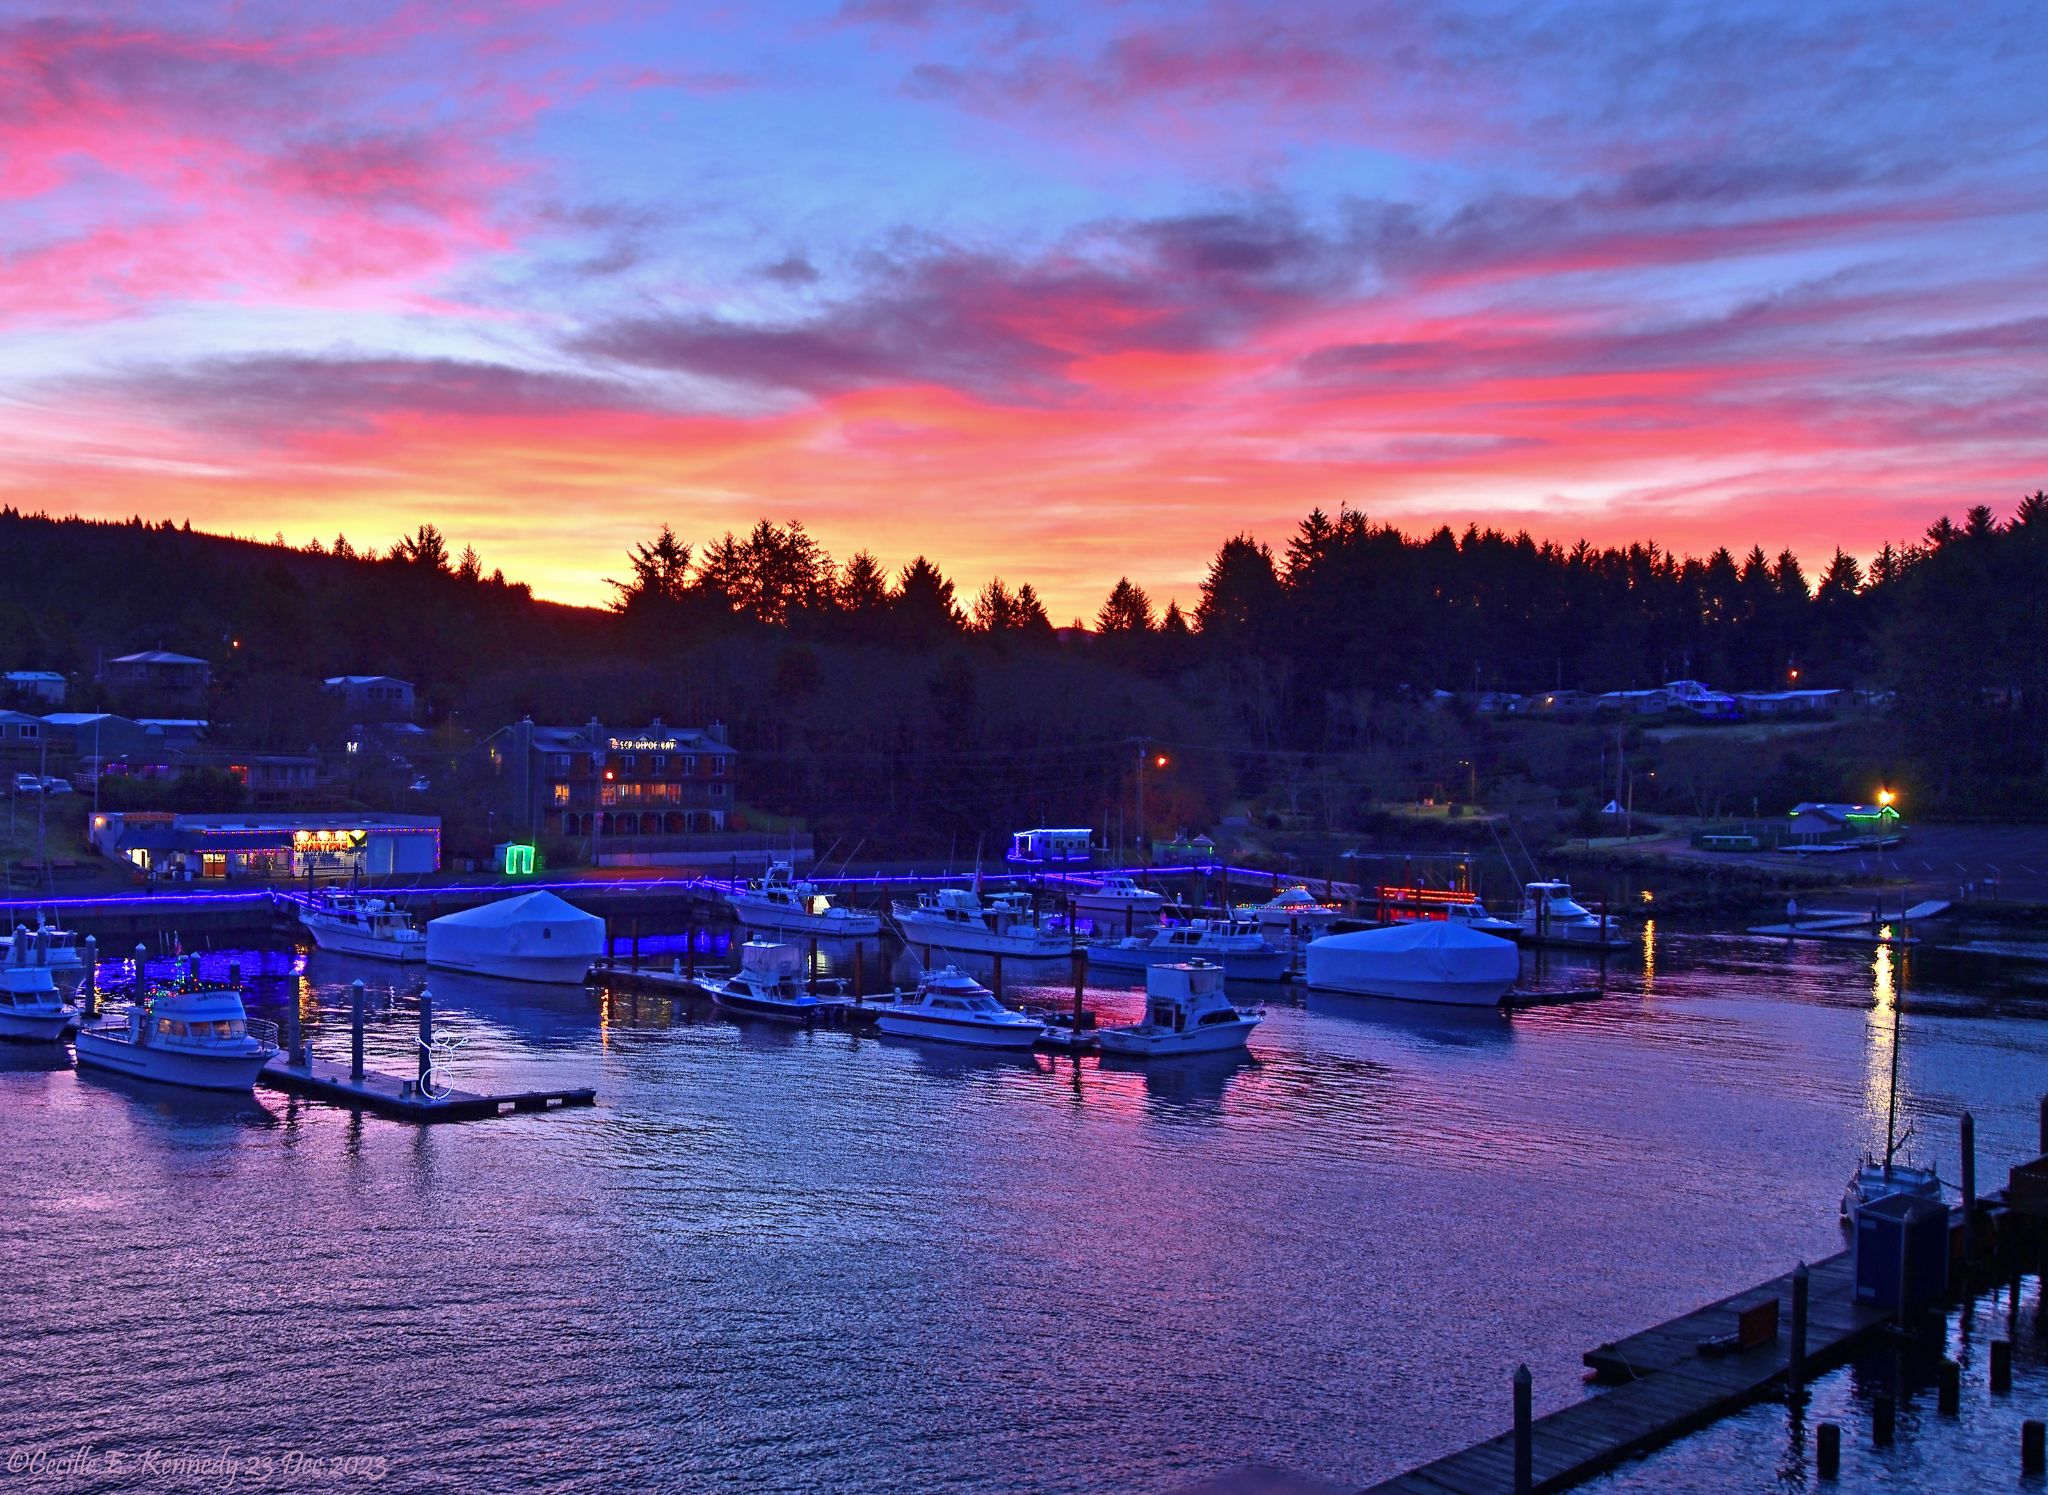 Community photo by Cecille Kennedy | Depoe Bay Harbor, Oregon